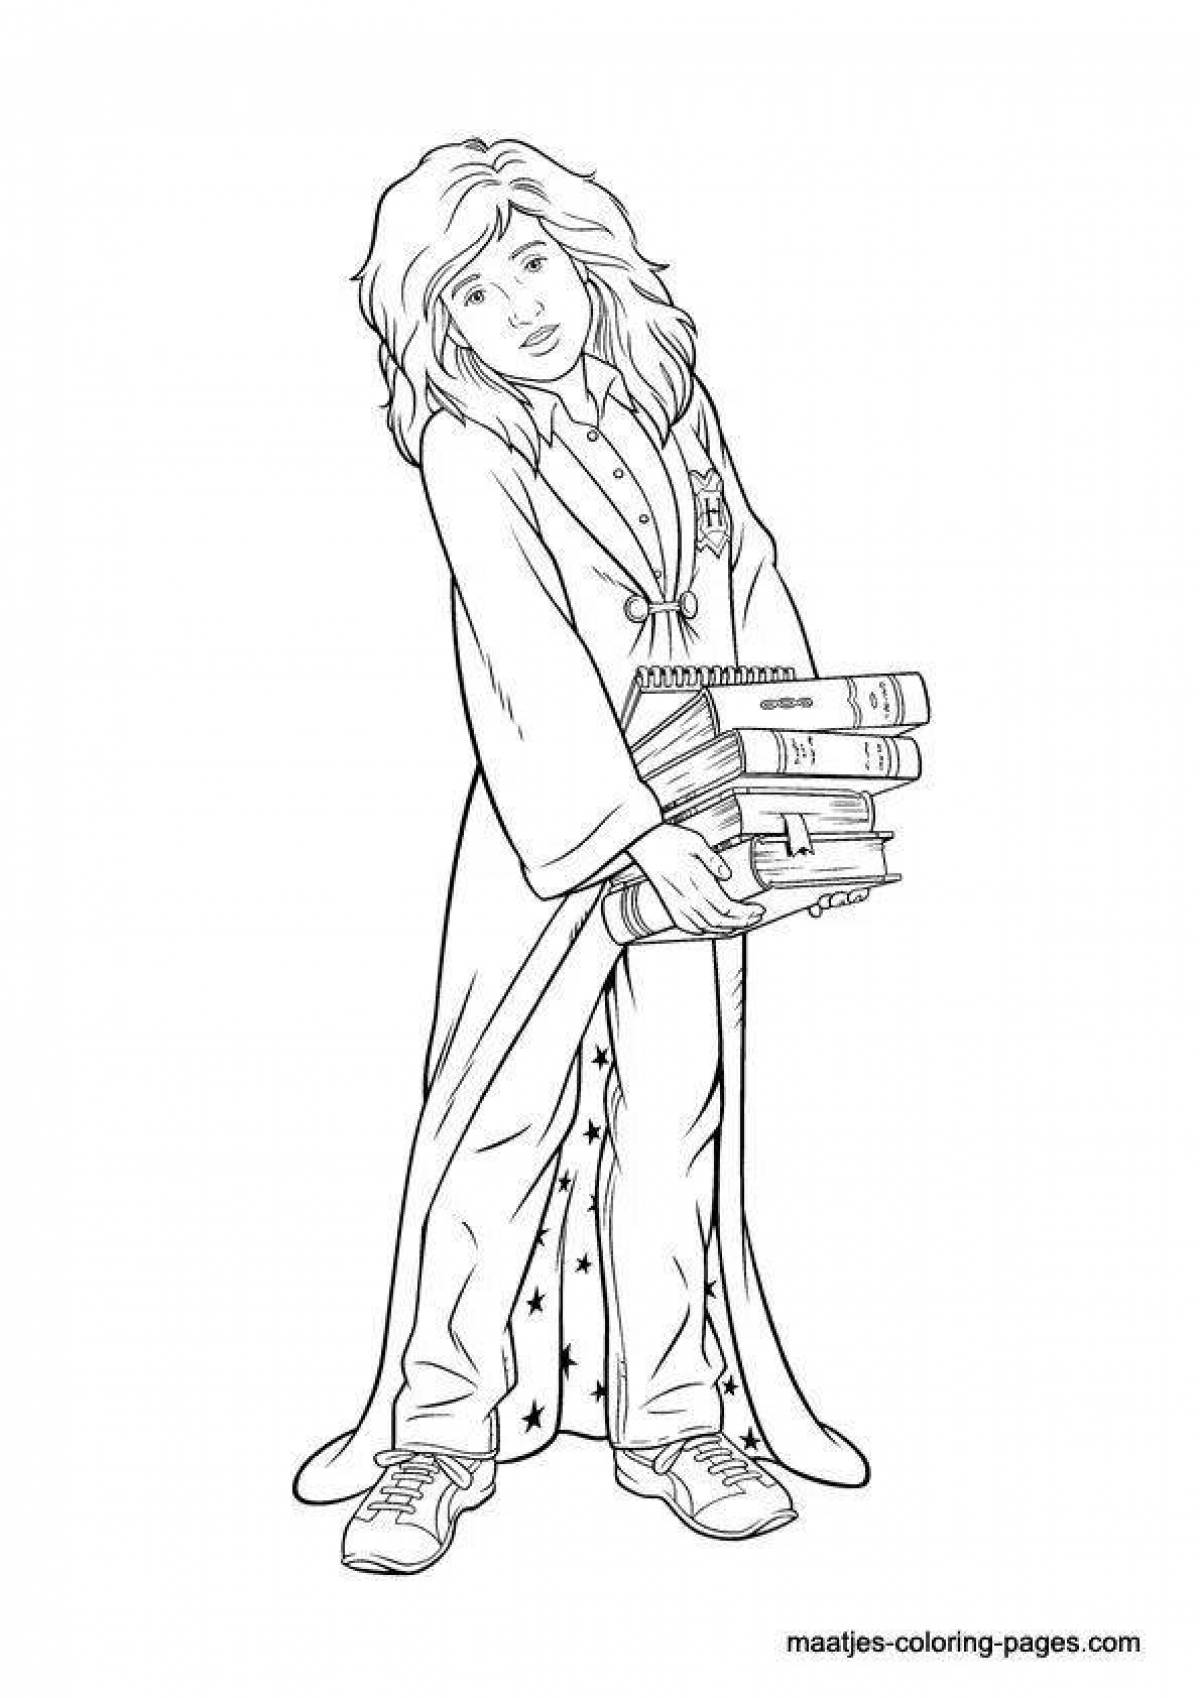 Harry potter coloring book for girls